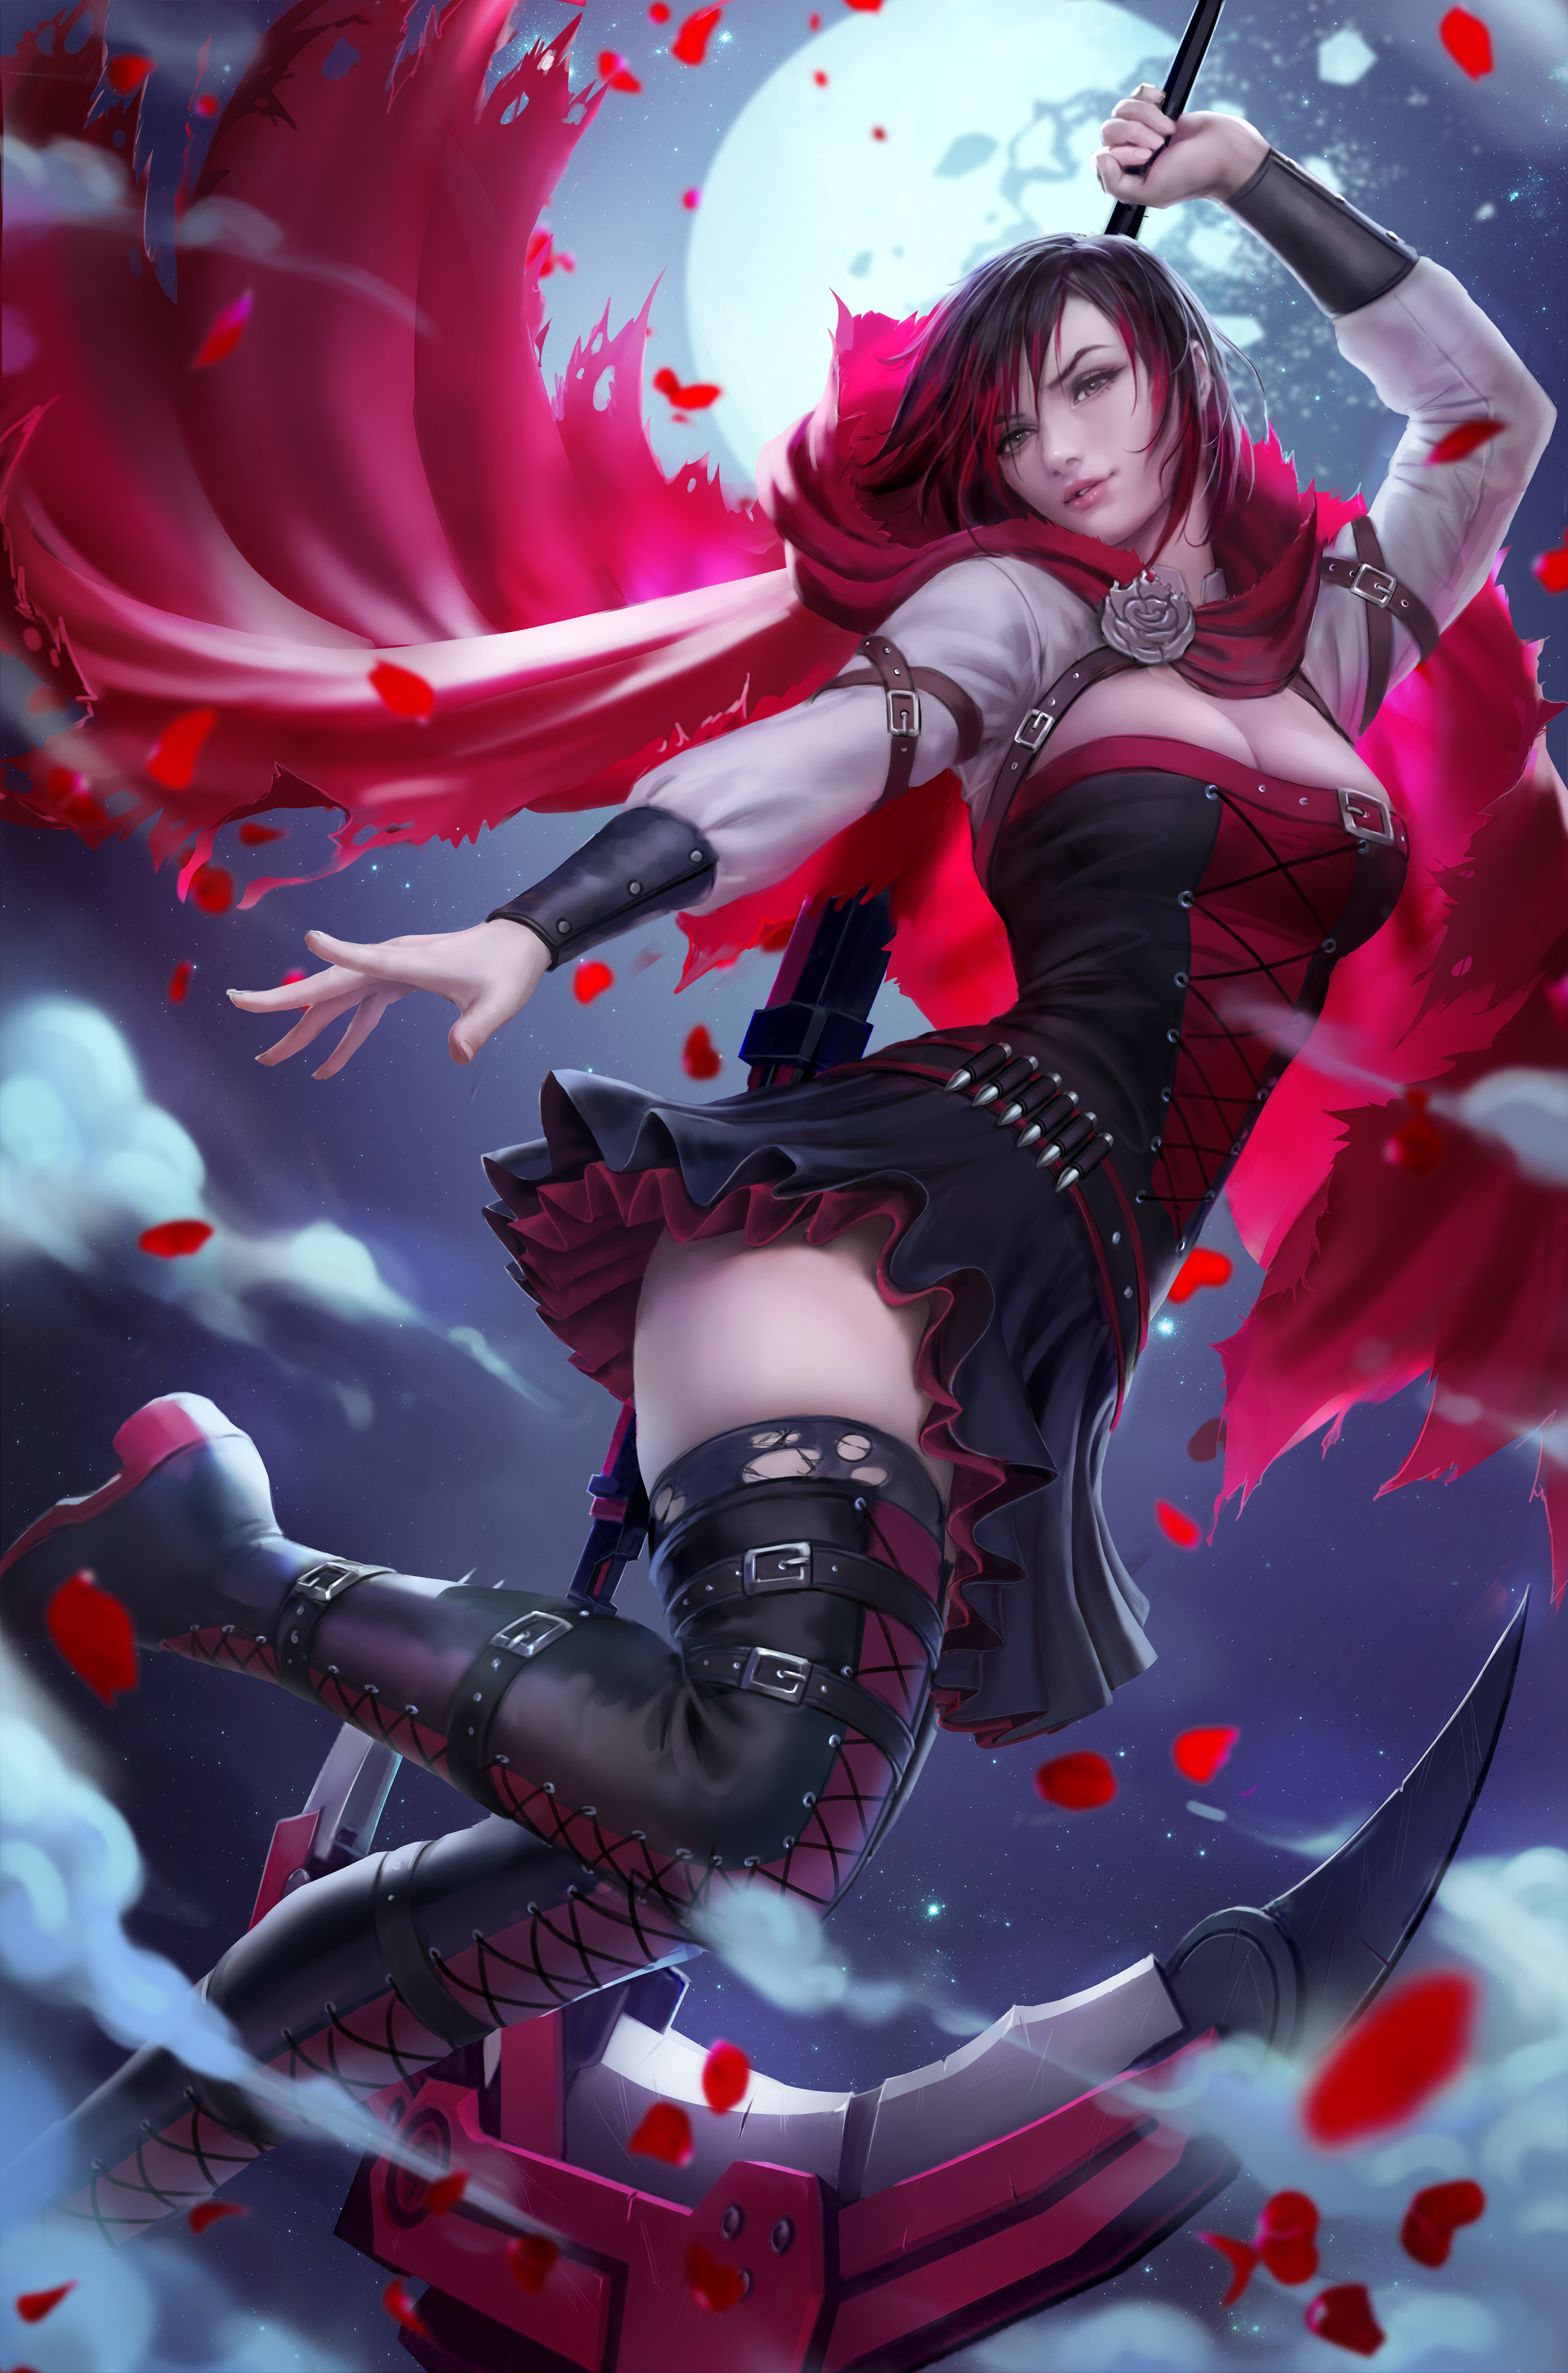 Desktop Wallpaper Beautiful, Anime Girl, Ruby Rose, Rwby, Art, Hd Image,  Picture, Background, D8f36f